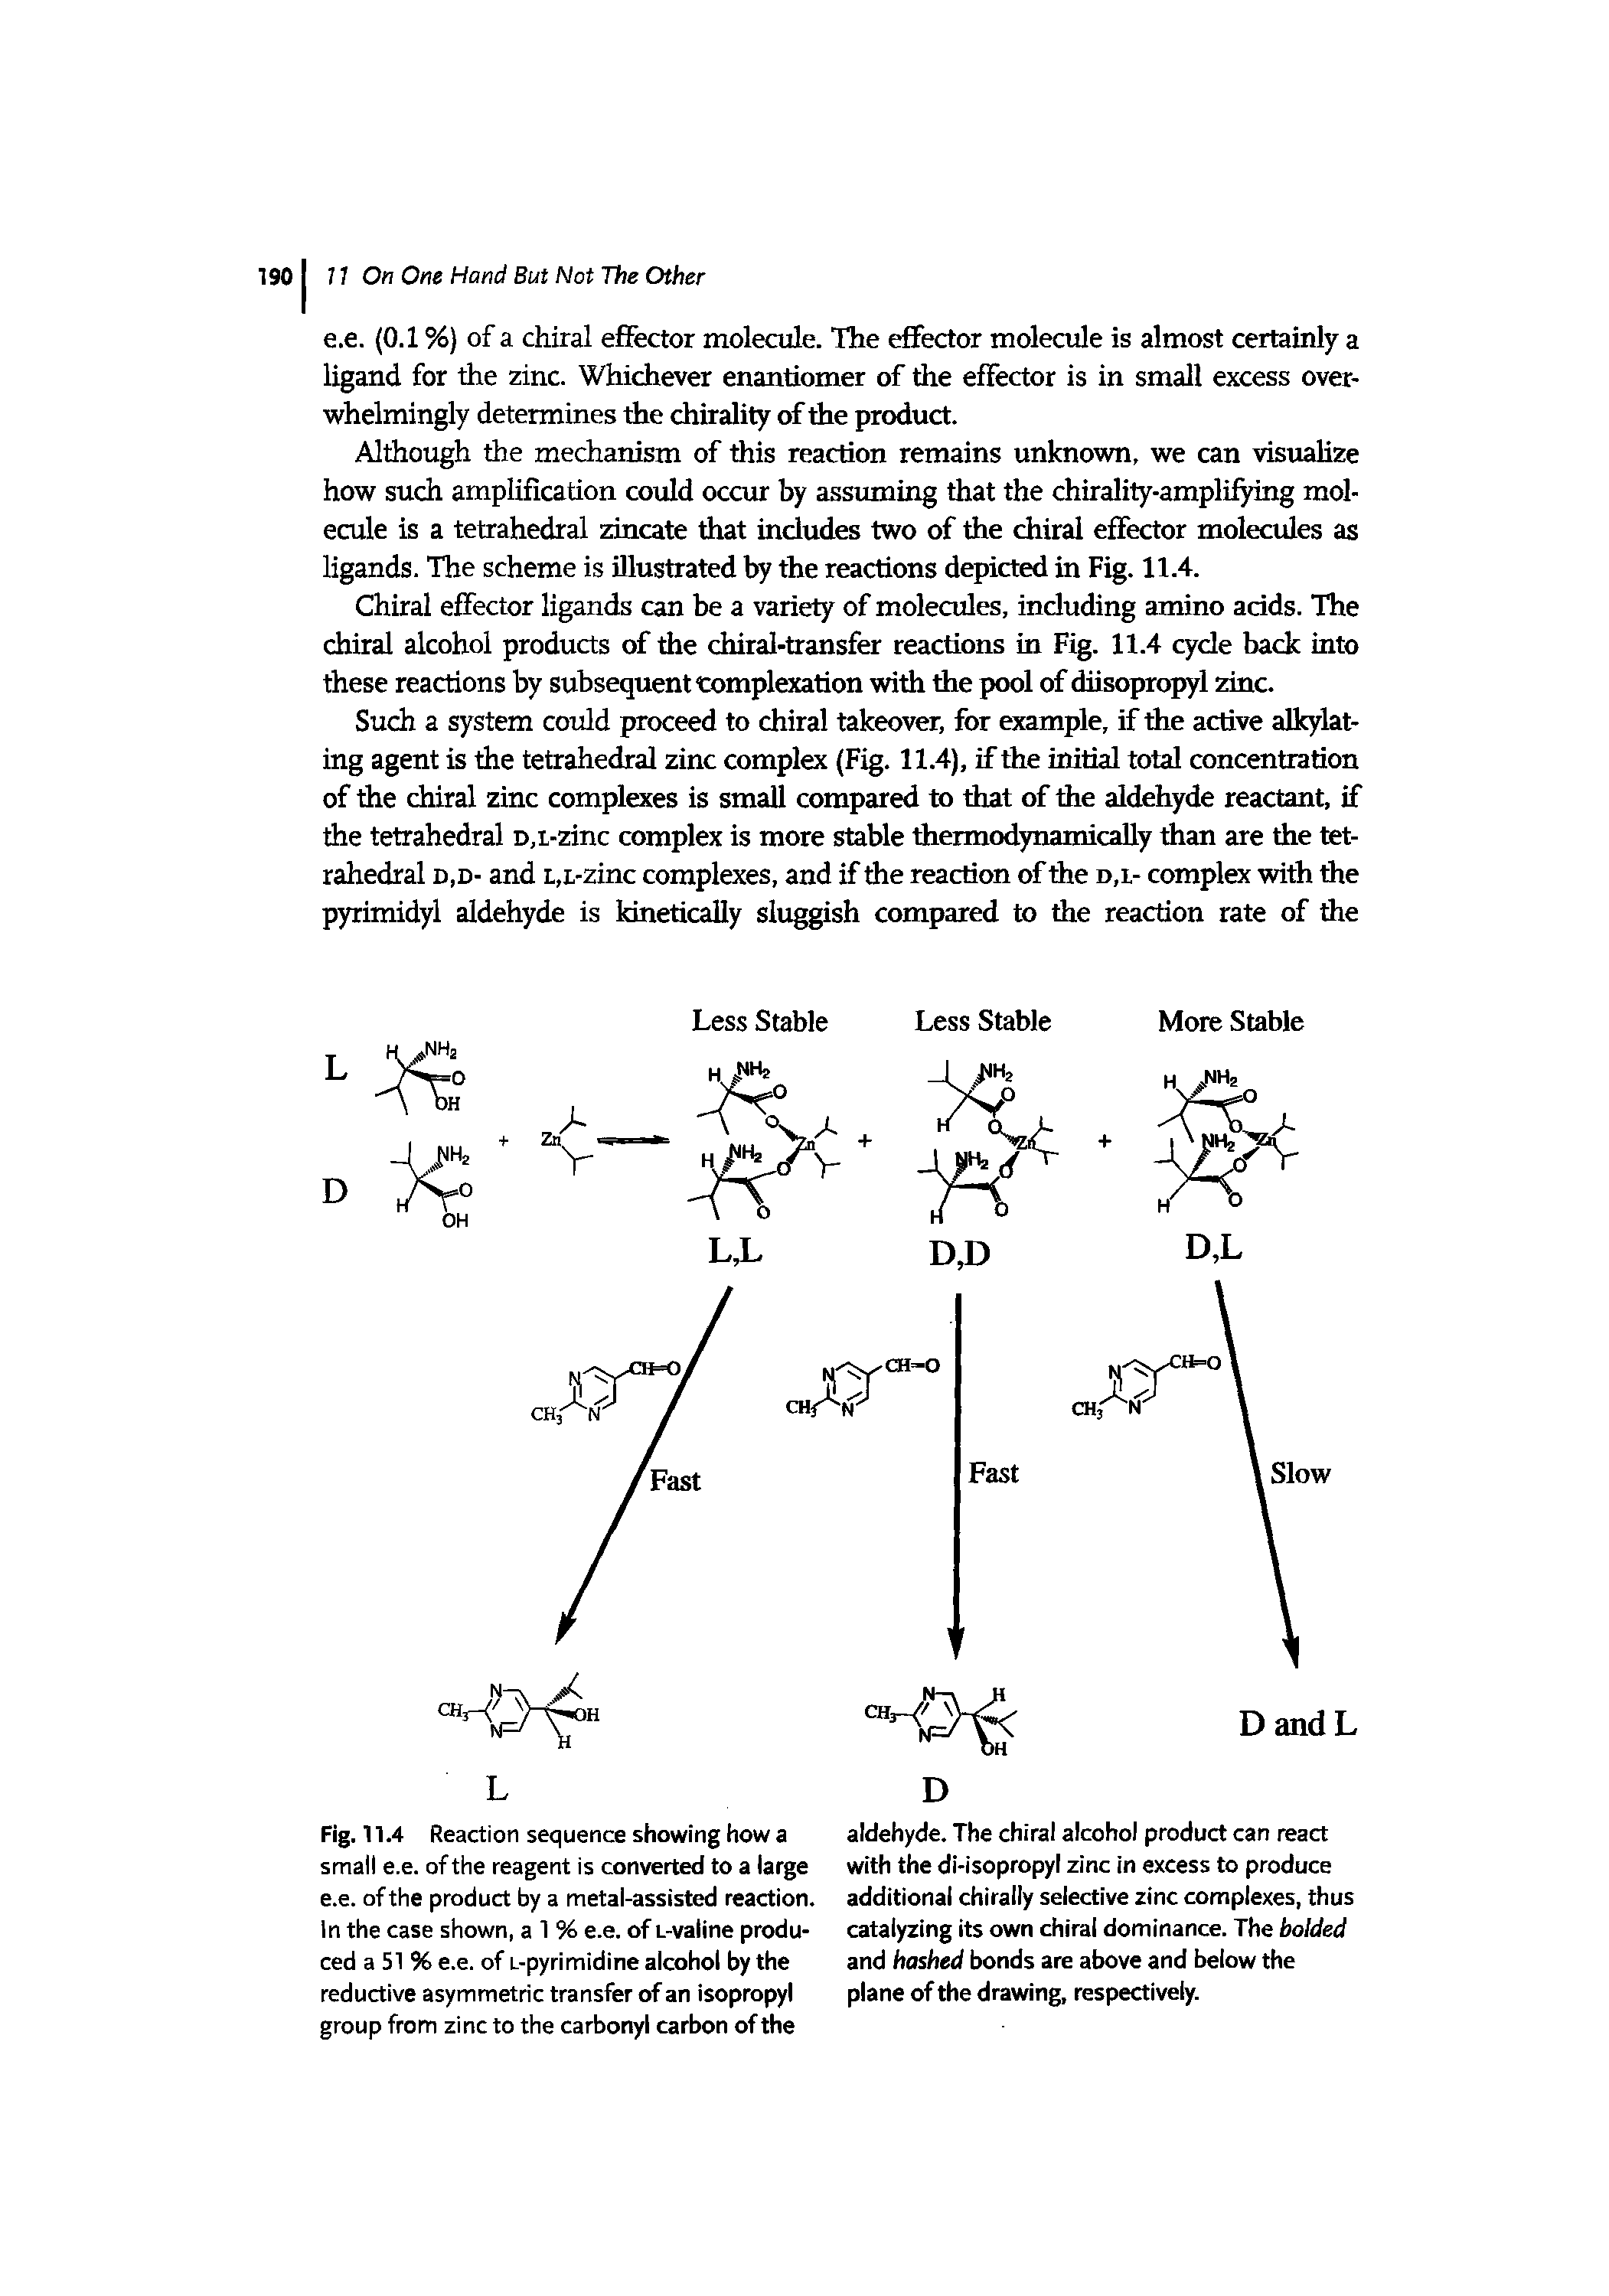 Fig. U.4 Reaction sequence showing how a small e.e. of the reagent is converted to a large e.e. of the product by a metal-assisted reaction. In the case shown, a 1 % e.e. of L-valine produced a 51 % e.e. of L-pyrimidine alcohol by the reductive asymmetric transfer of an isopropyl group from zinc to the carbonyl carbon of the...